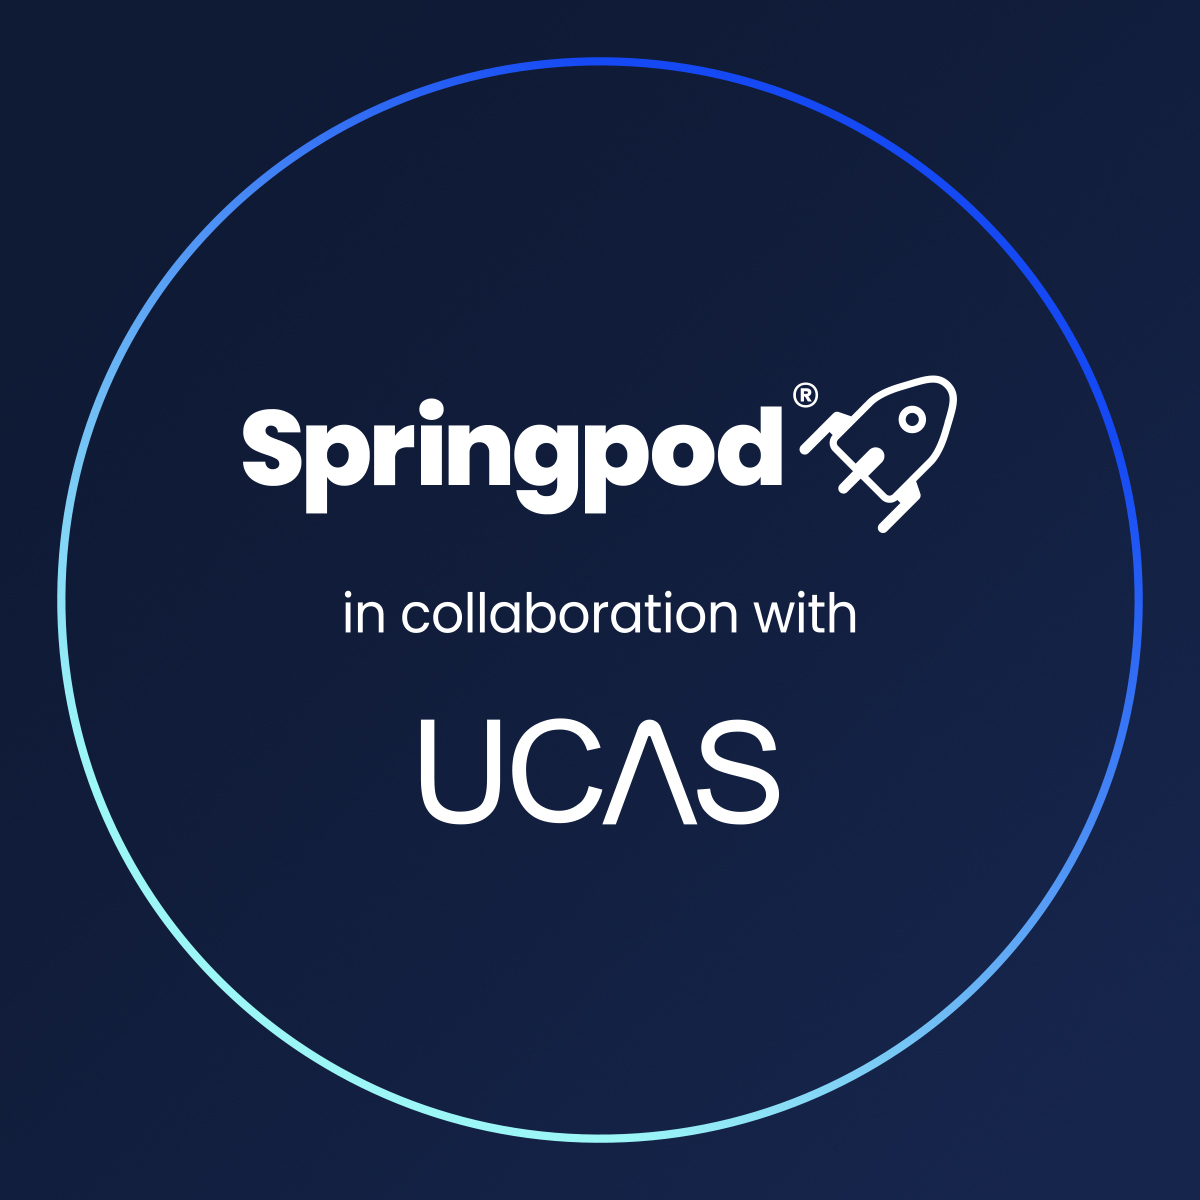 🎉We’re delighted to announce our partnership with @ucas_online This spring, students will be able to experience university courses and careers through the #UCAS Hub, before they submit their applications. Find out more here: bit.ly/ucas-springpod